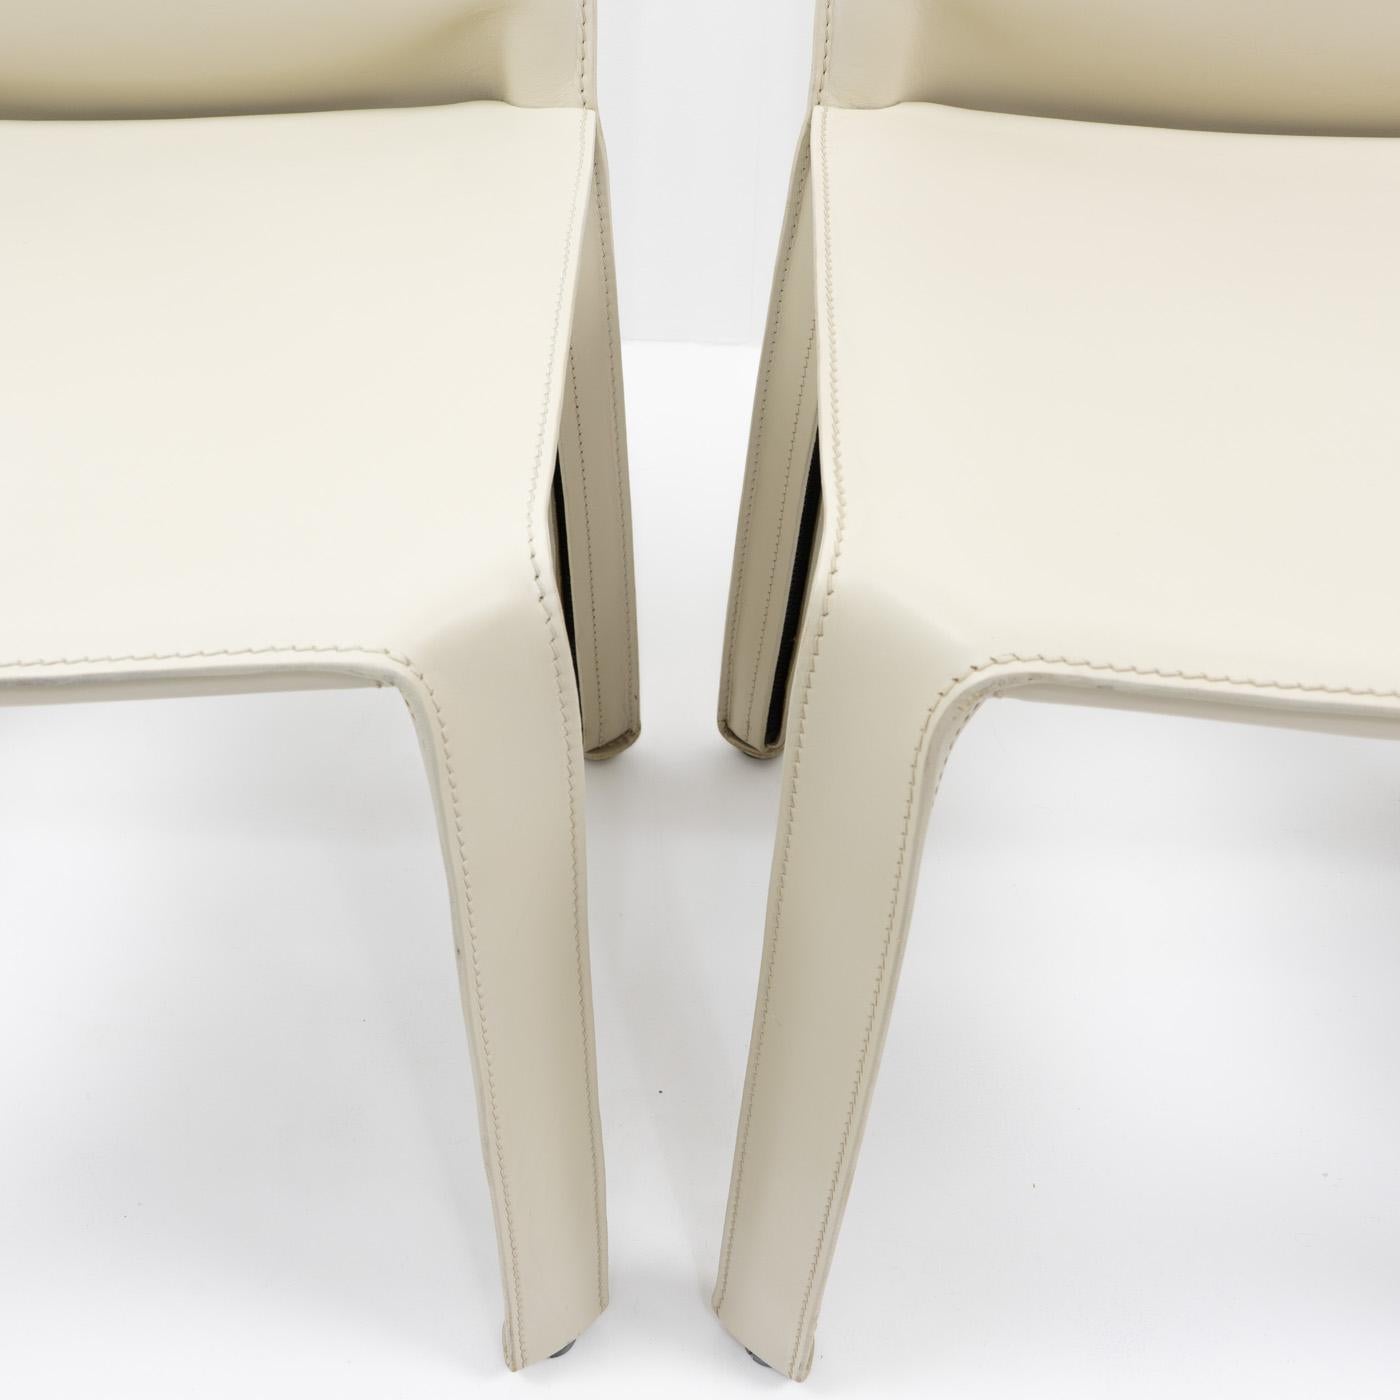 Metal Cab 412 Chairs in Cream Leather by Mario Bellini for Cassina, Set of 4 For Sale